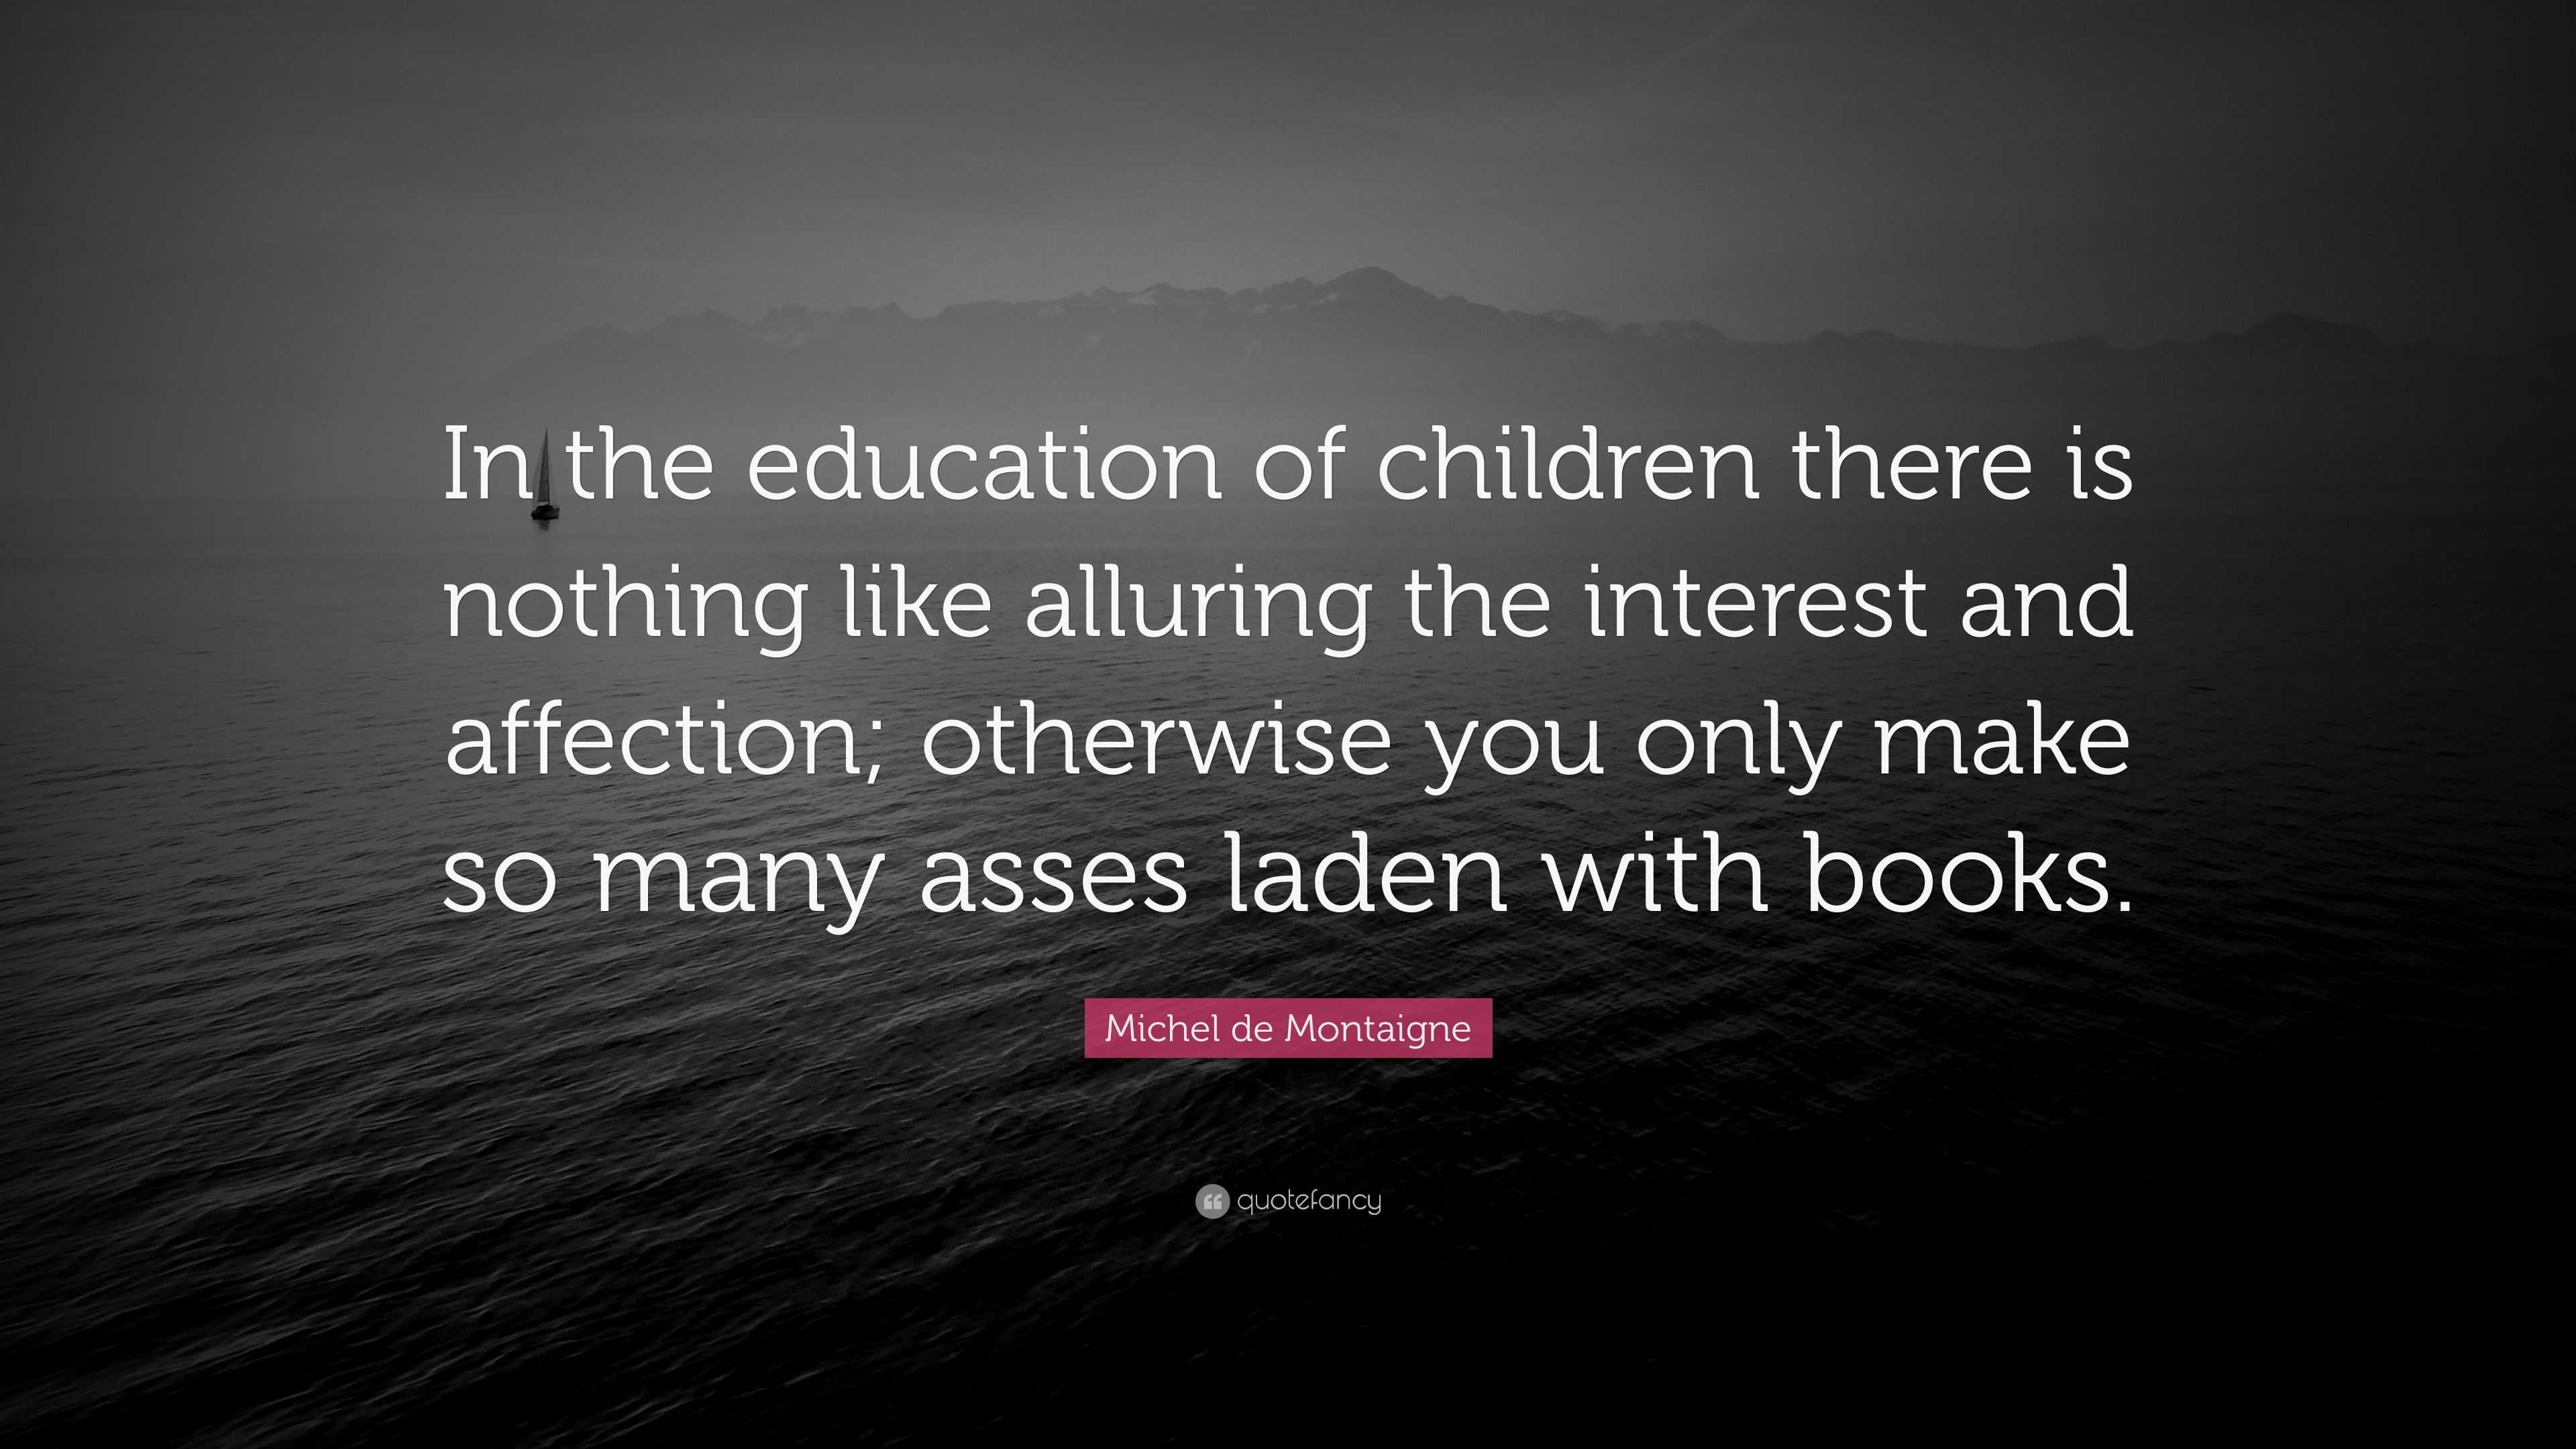 Michel de Montaigne Quote “In the education of children there is nothing like alluring